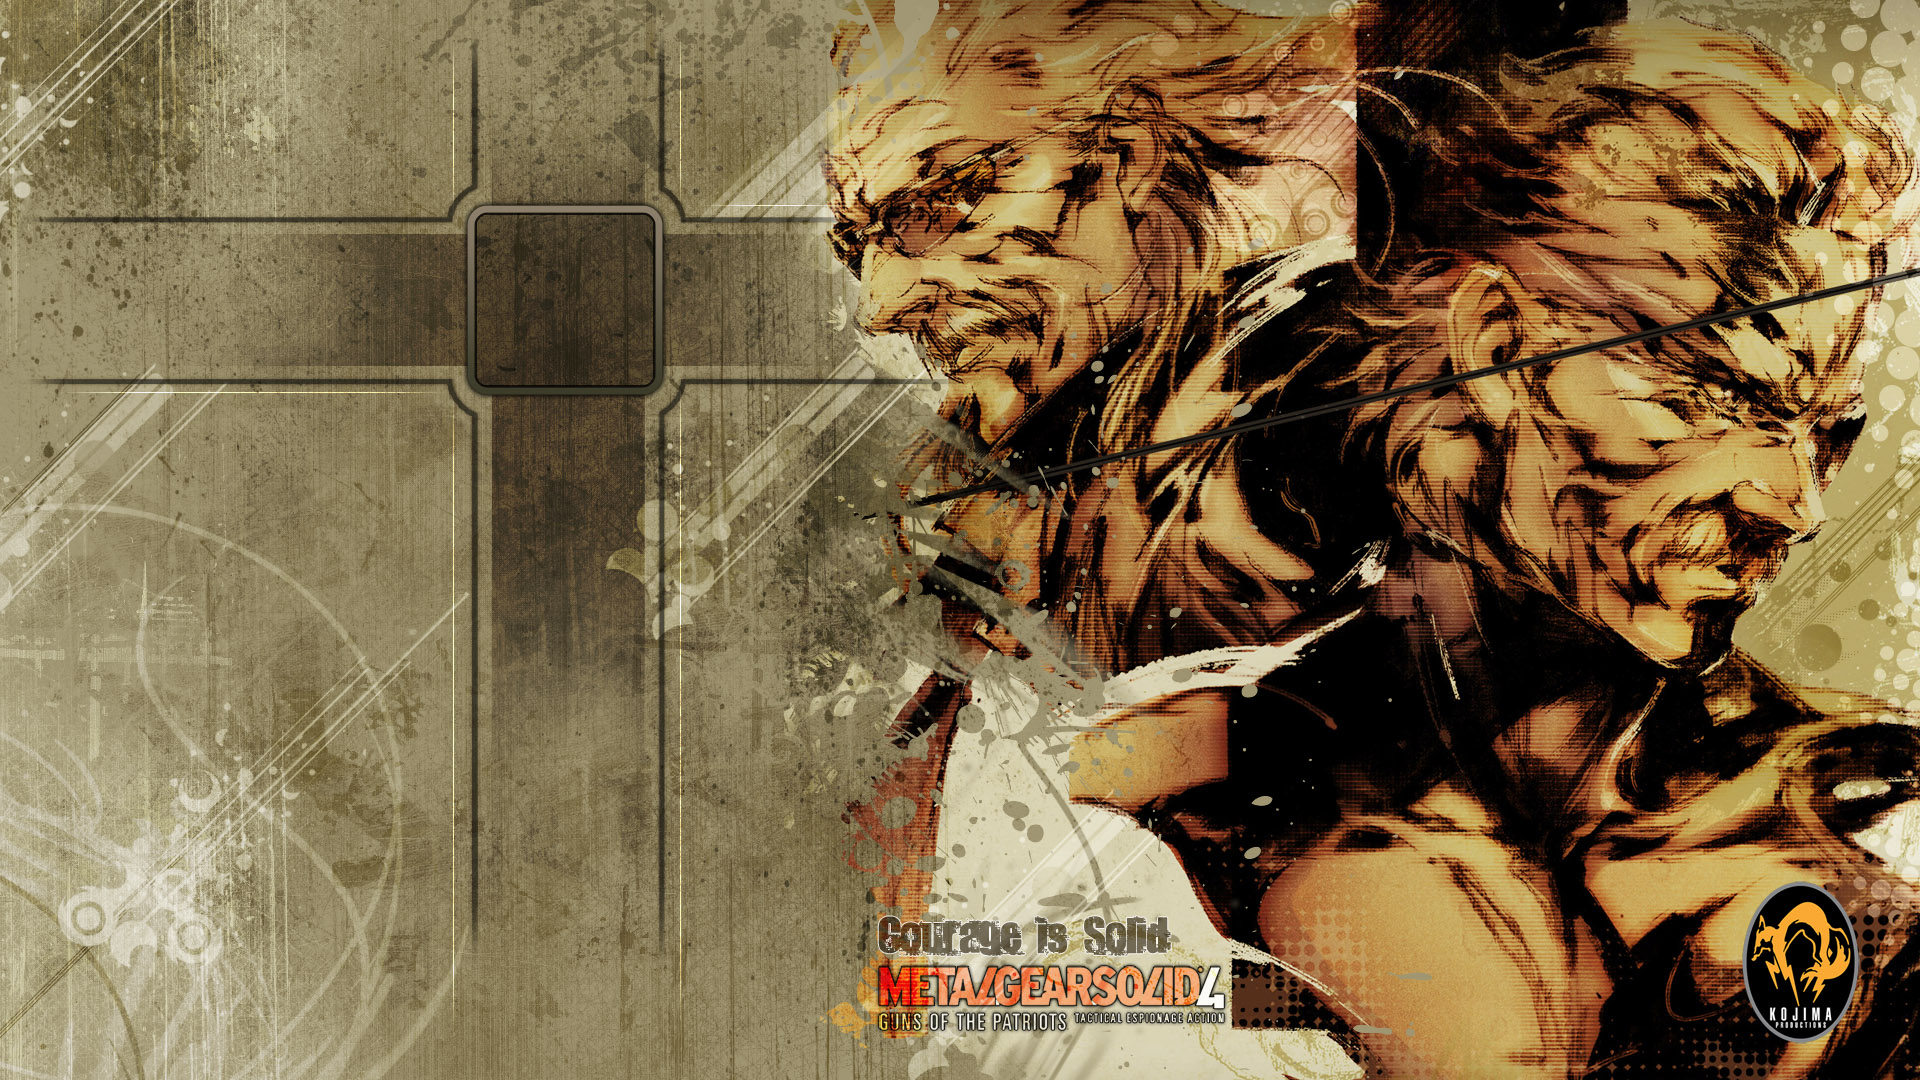 Mgs4 Courage Is Solid Wallpaper